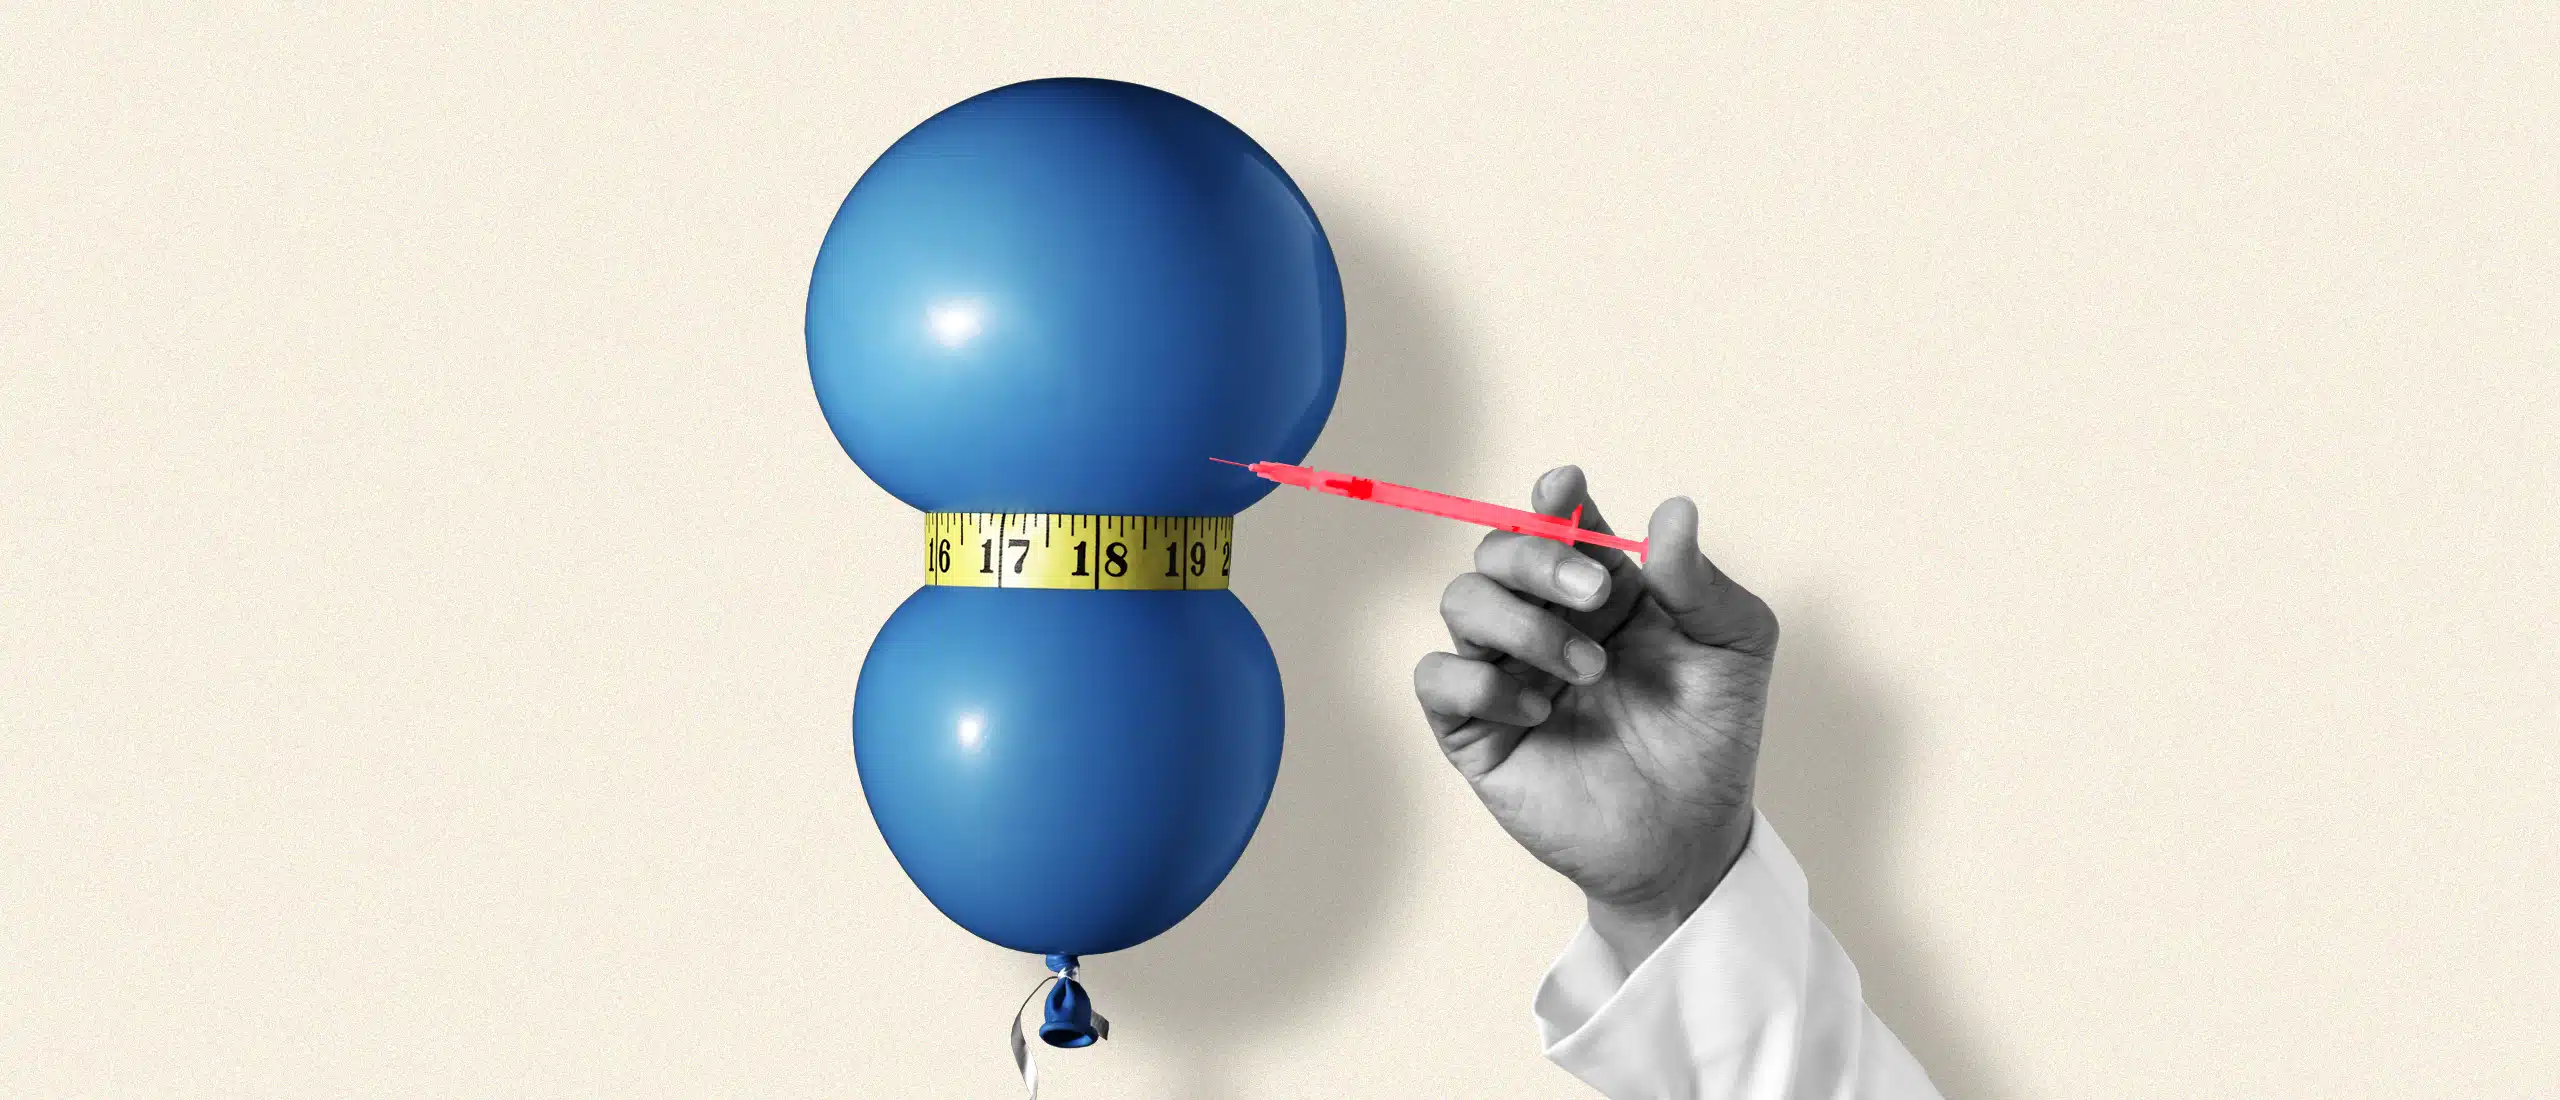 A doctor injects testosterone into a balloon which is cinched in the middle with a measuring tape